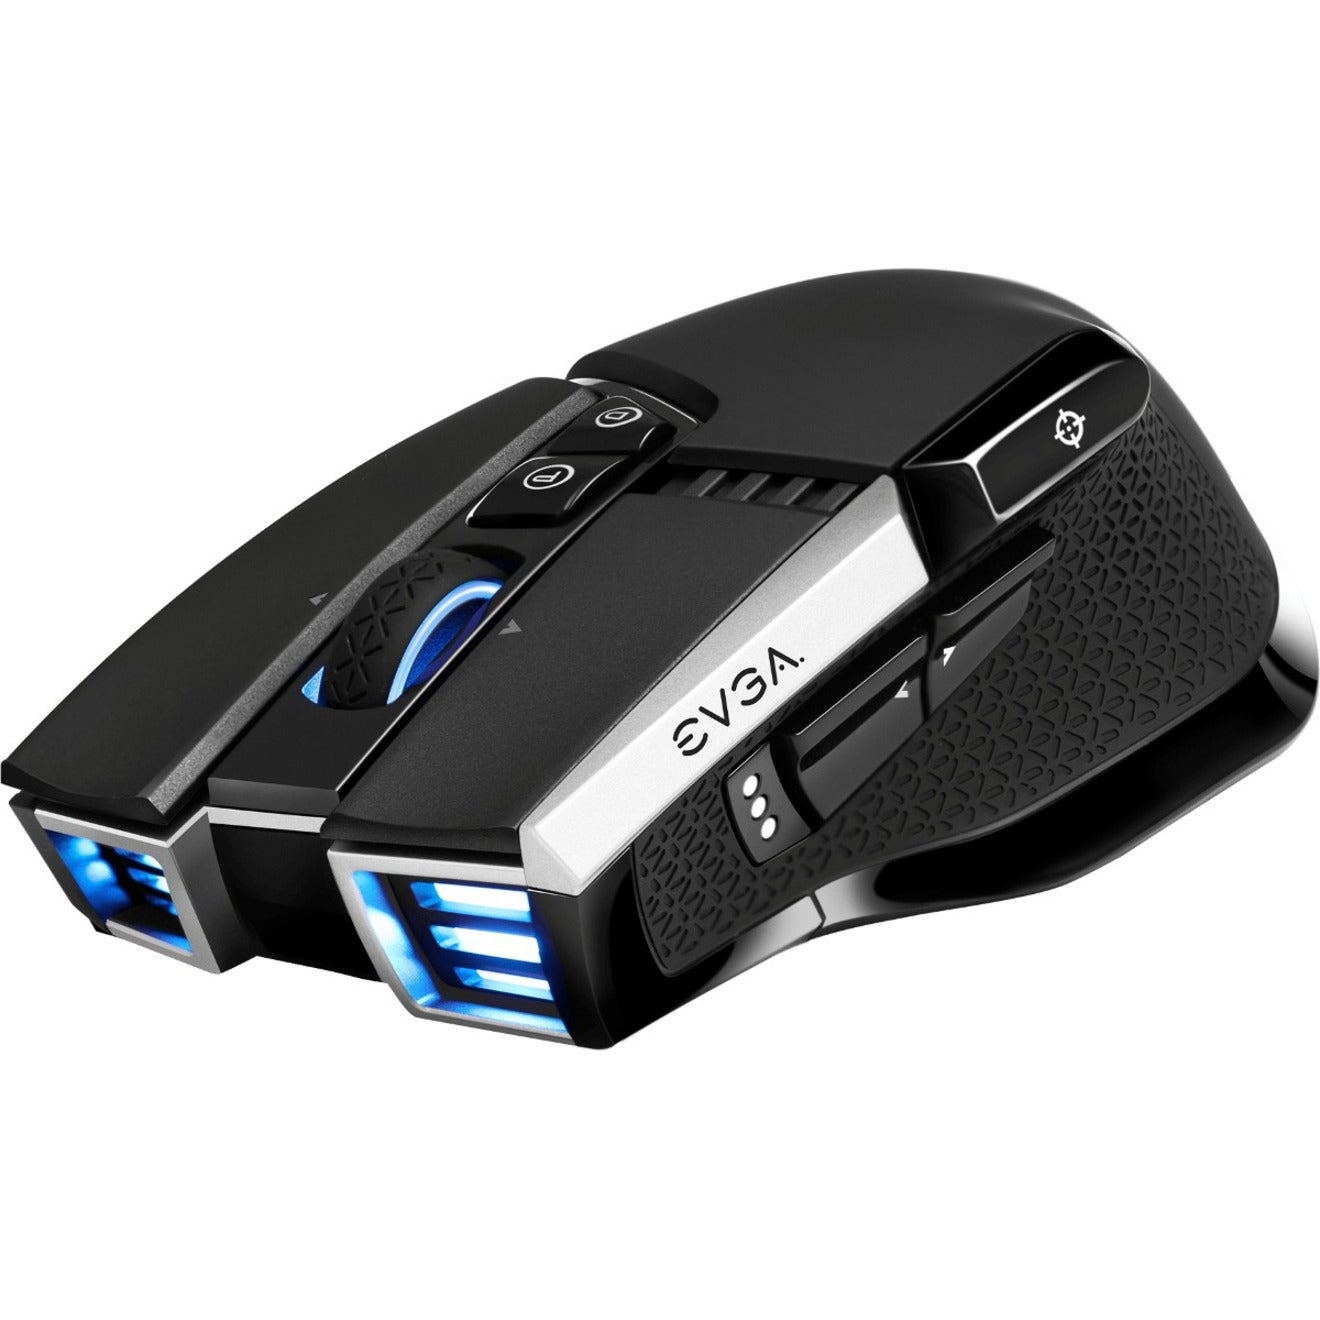 EVGA 903-T1-20BK-KR X20 Gaming Mouse, 10 Buttons, 16000 dpi, Bluetooth